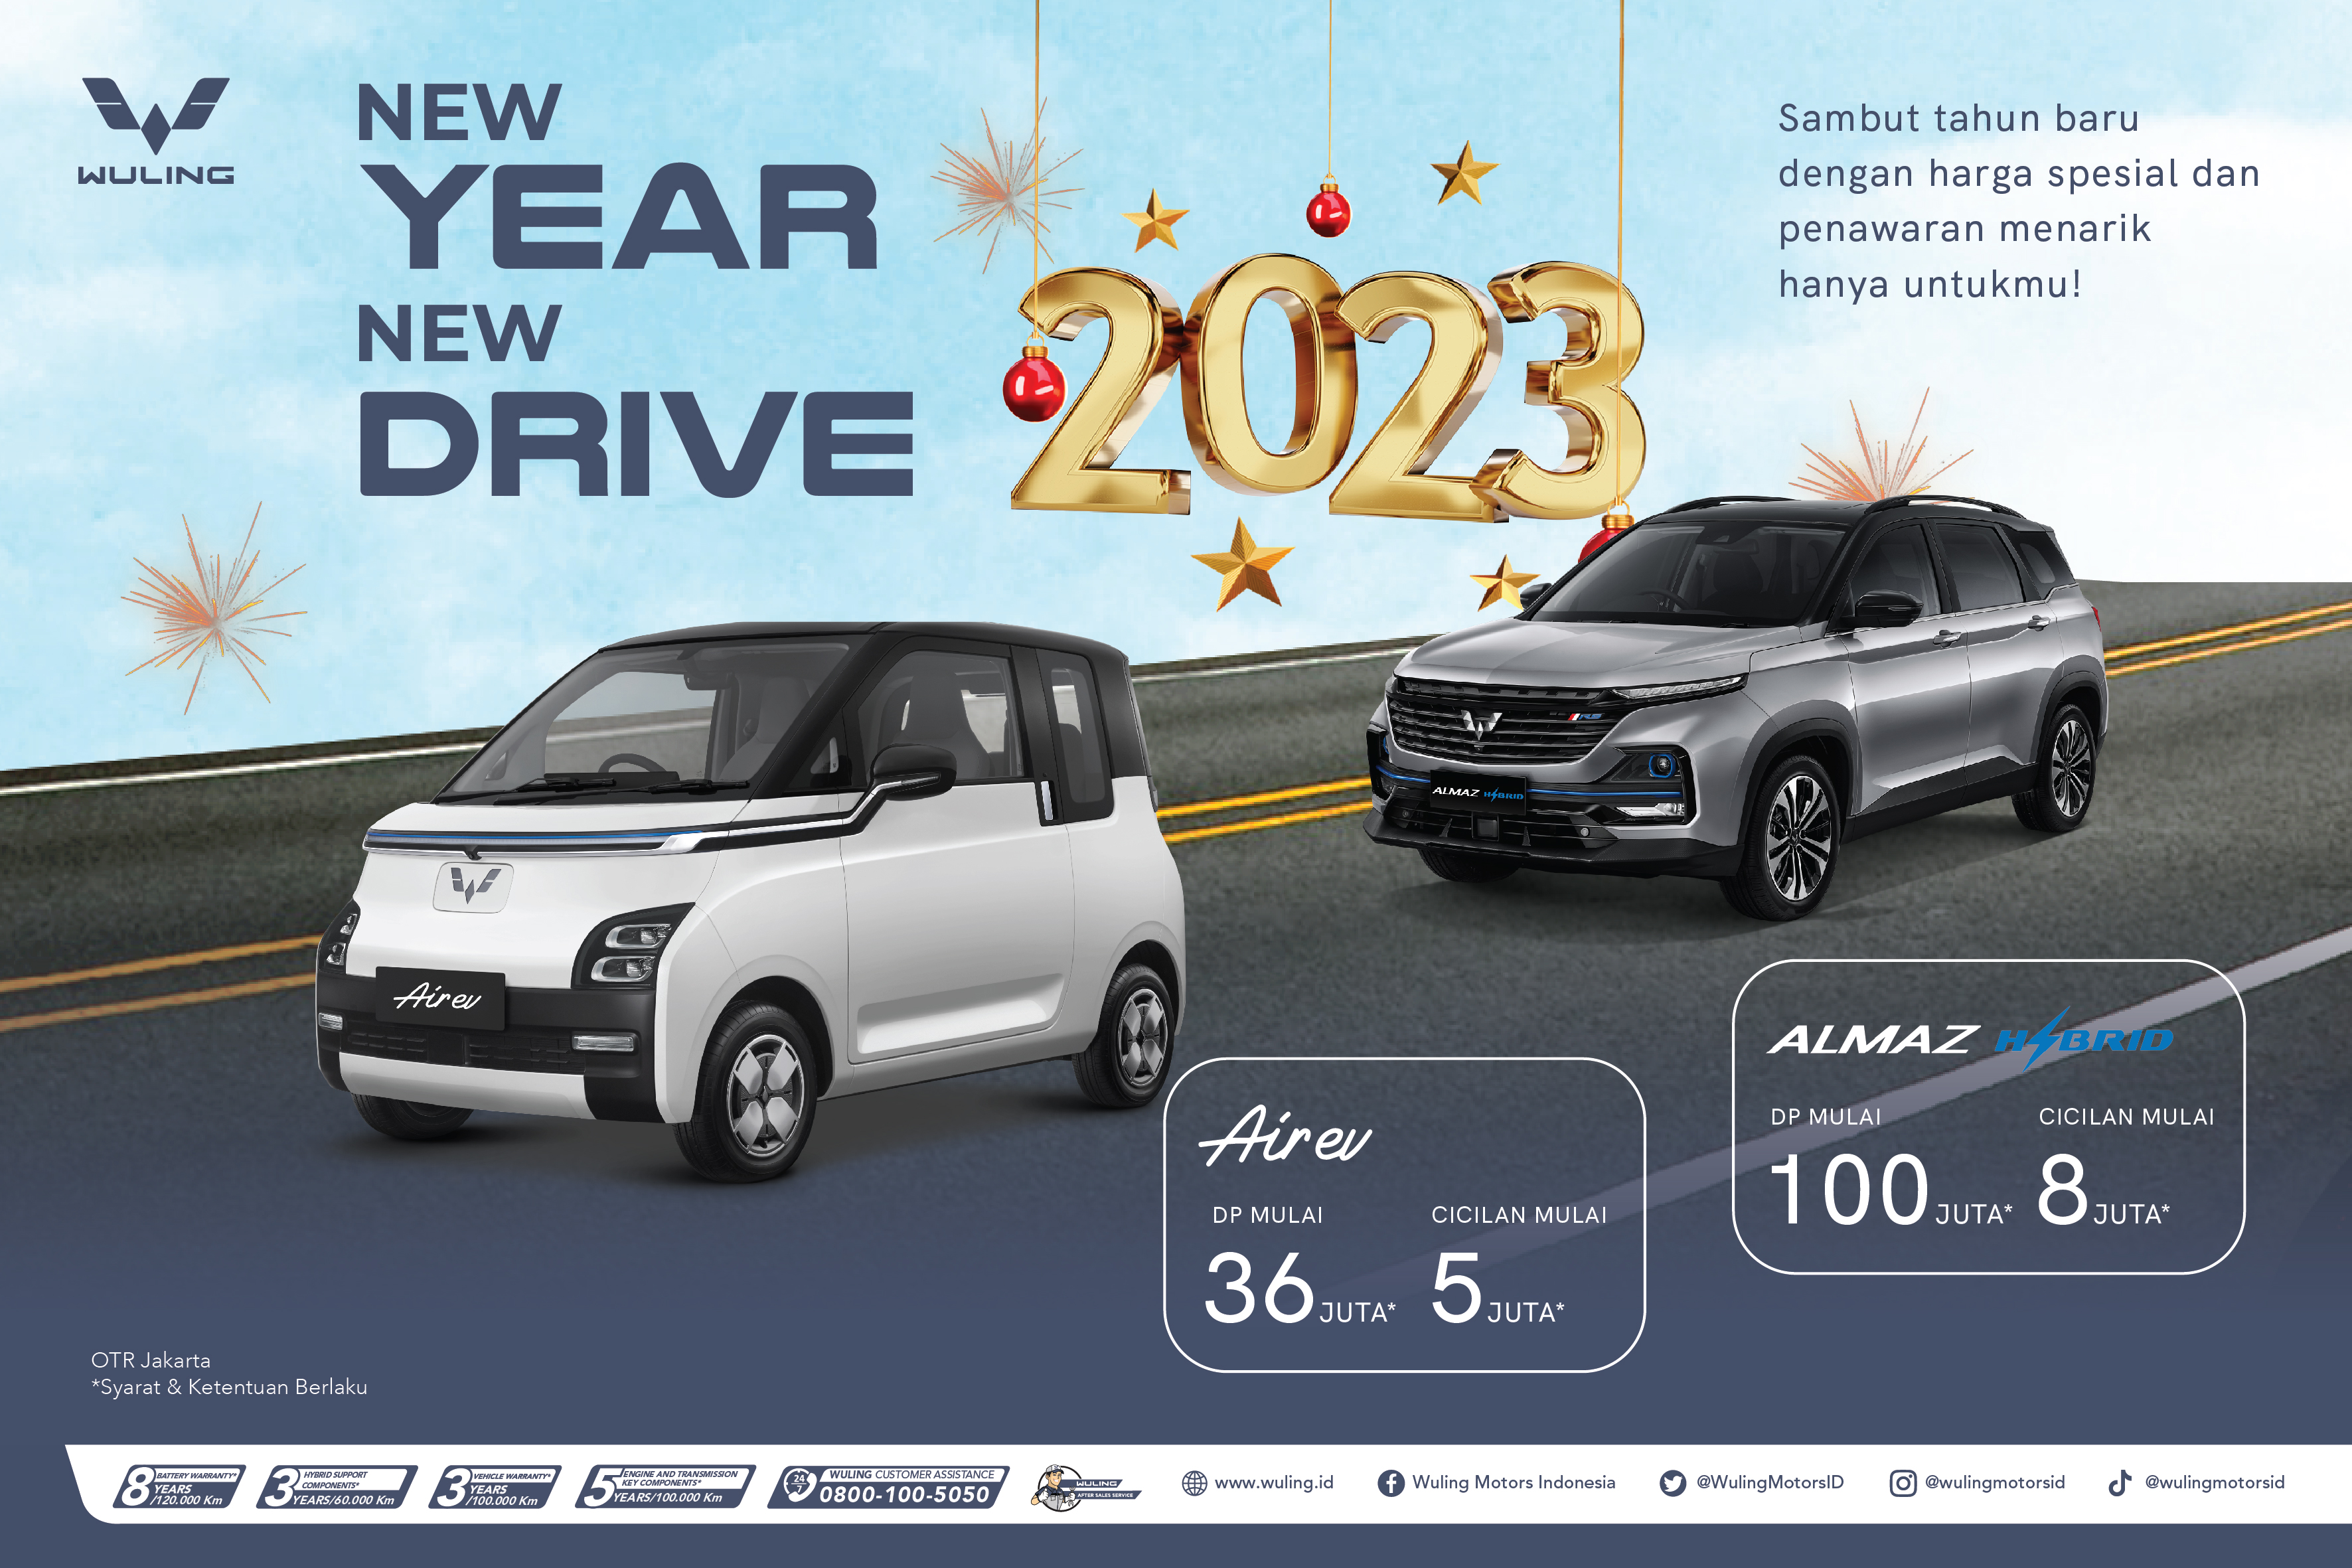 Image Wuling Holds a Special Promo ‘New Year, New Drive 2023’ to Welcome The New Year